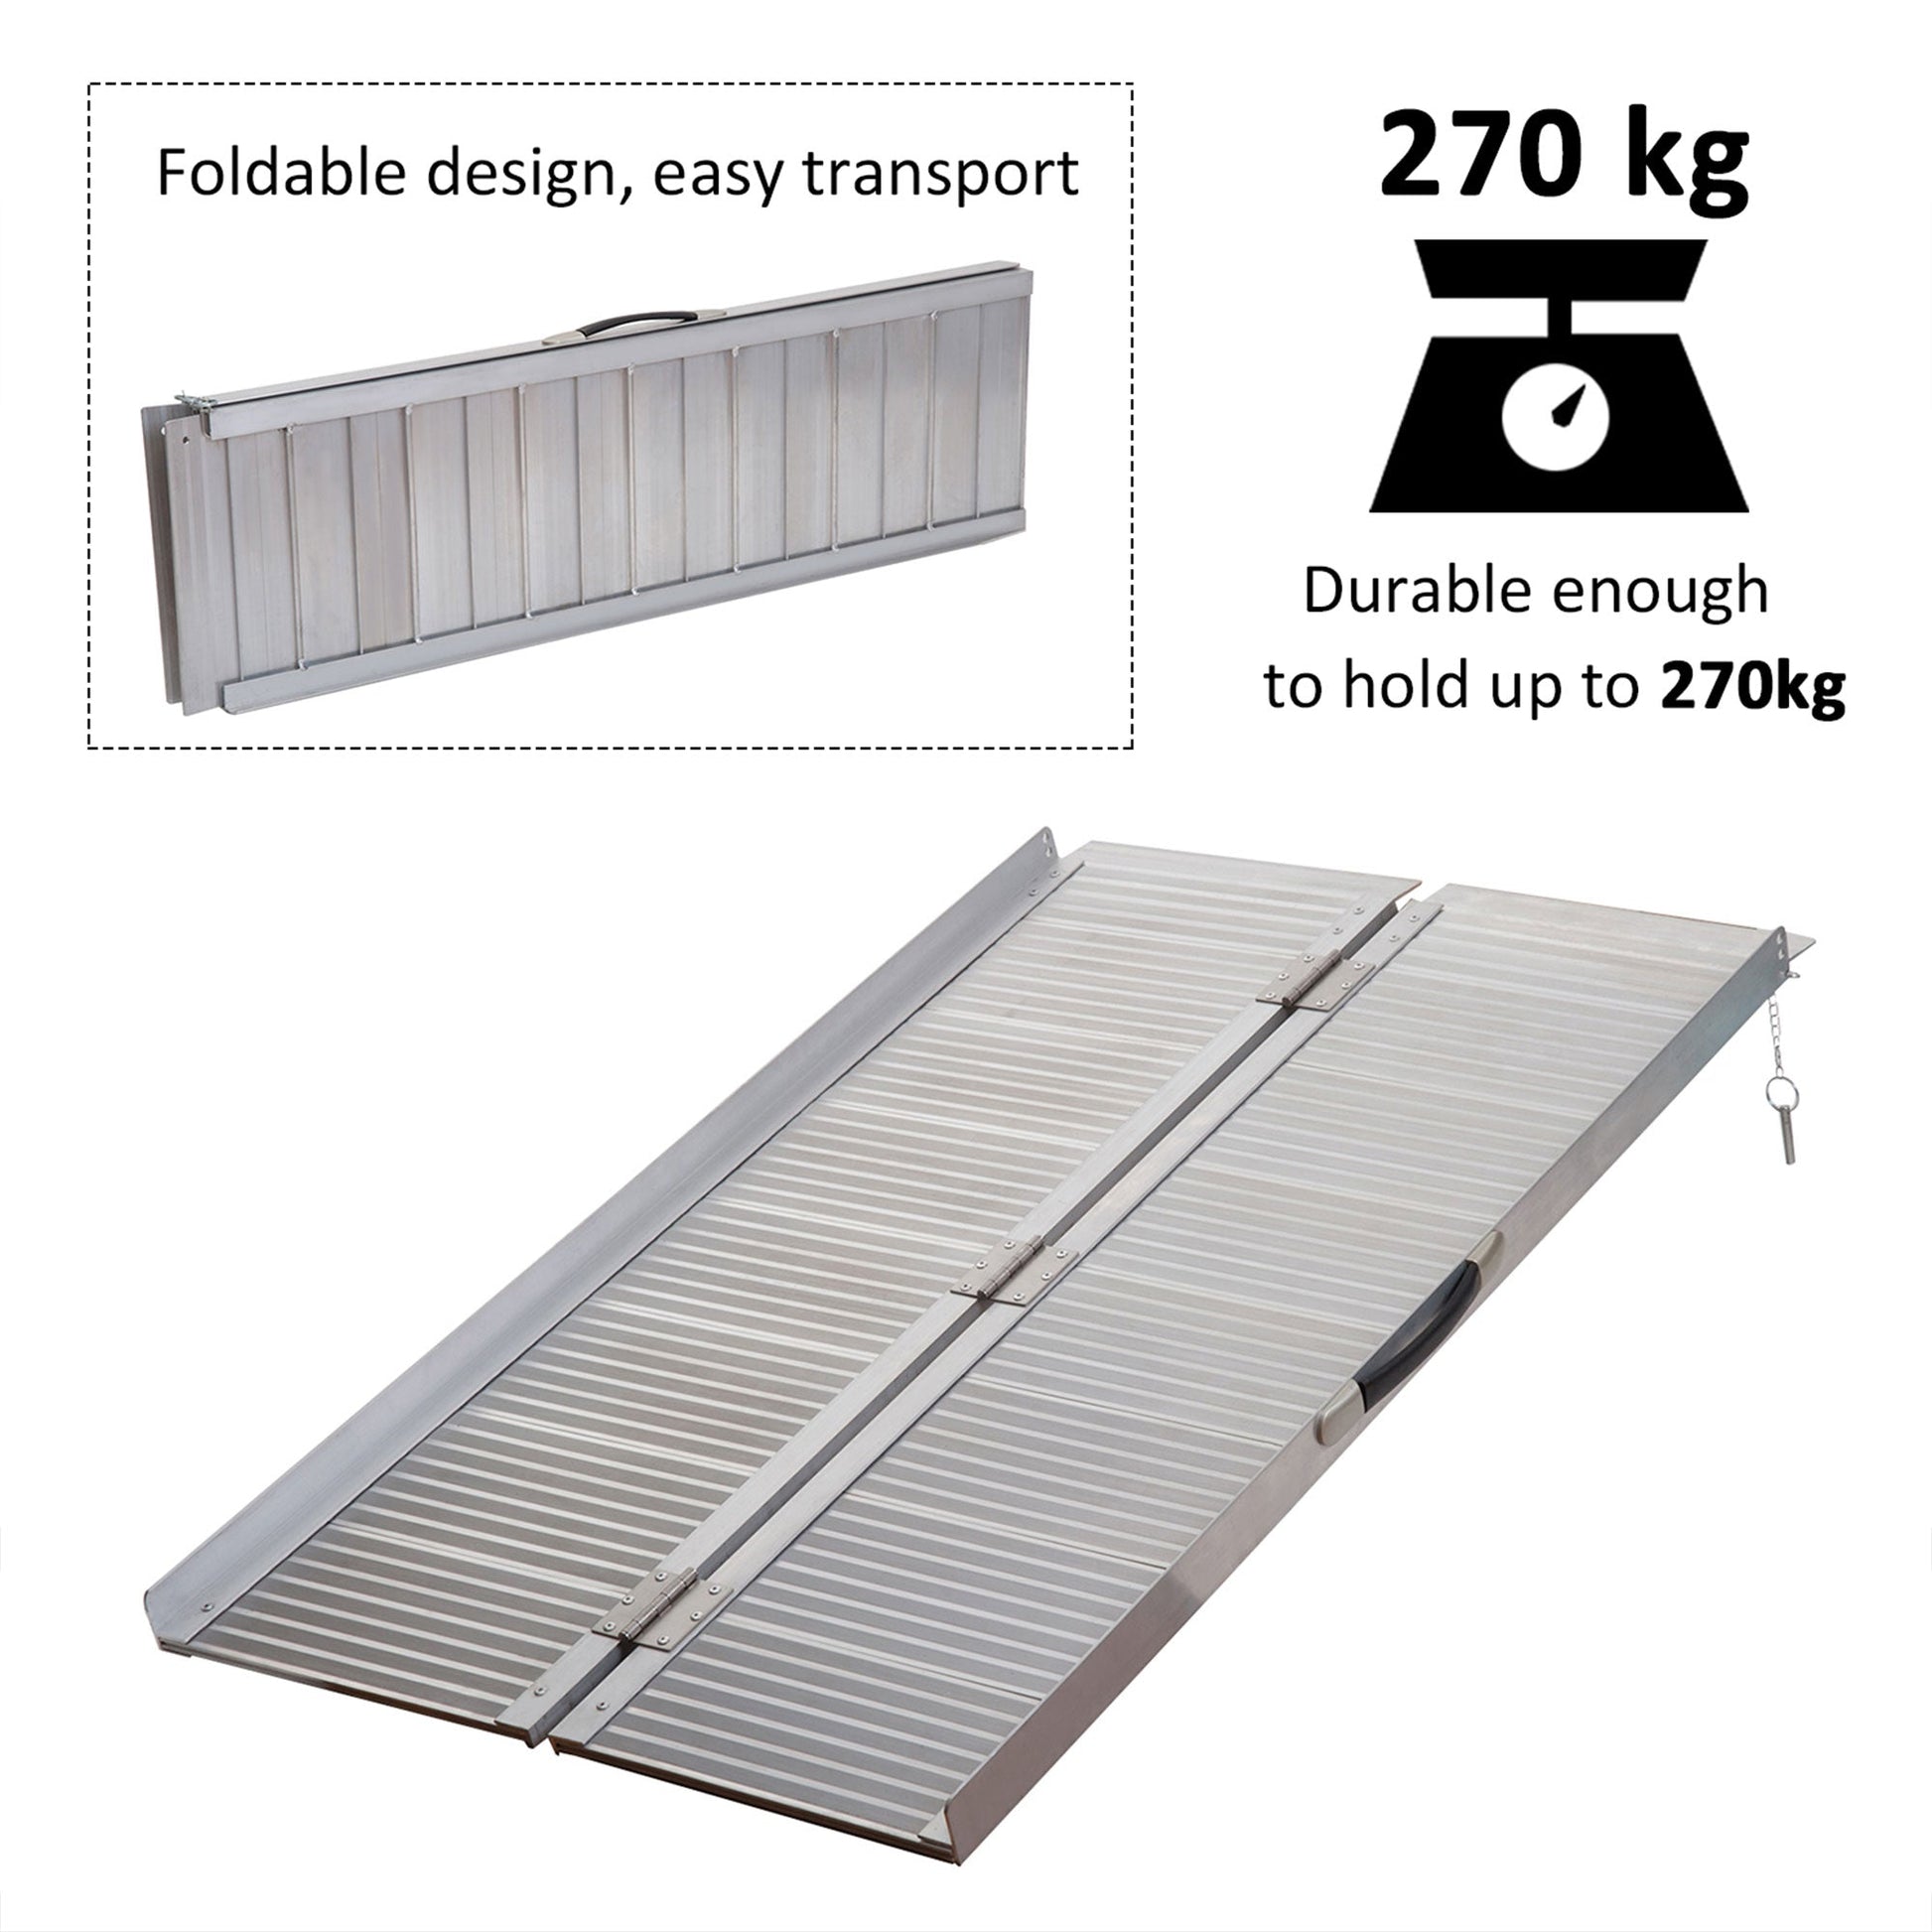 4ft Textured Aluminum Folding Wheelchair Ramp, Portable Threshold Ramp, for Scooter Steps Home Stairs Doorways at Gallery Canada